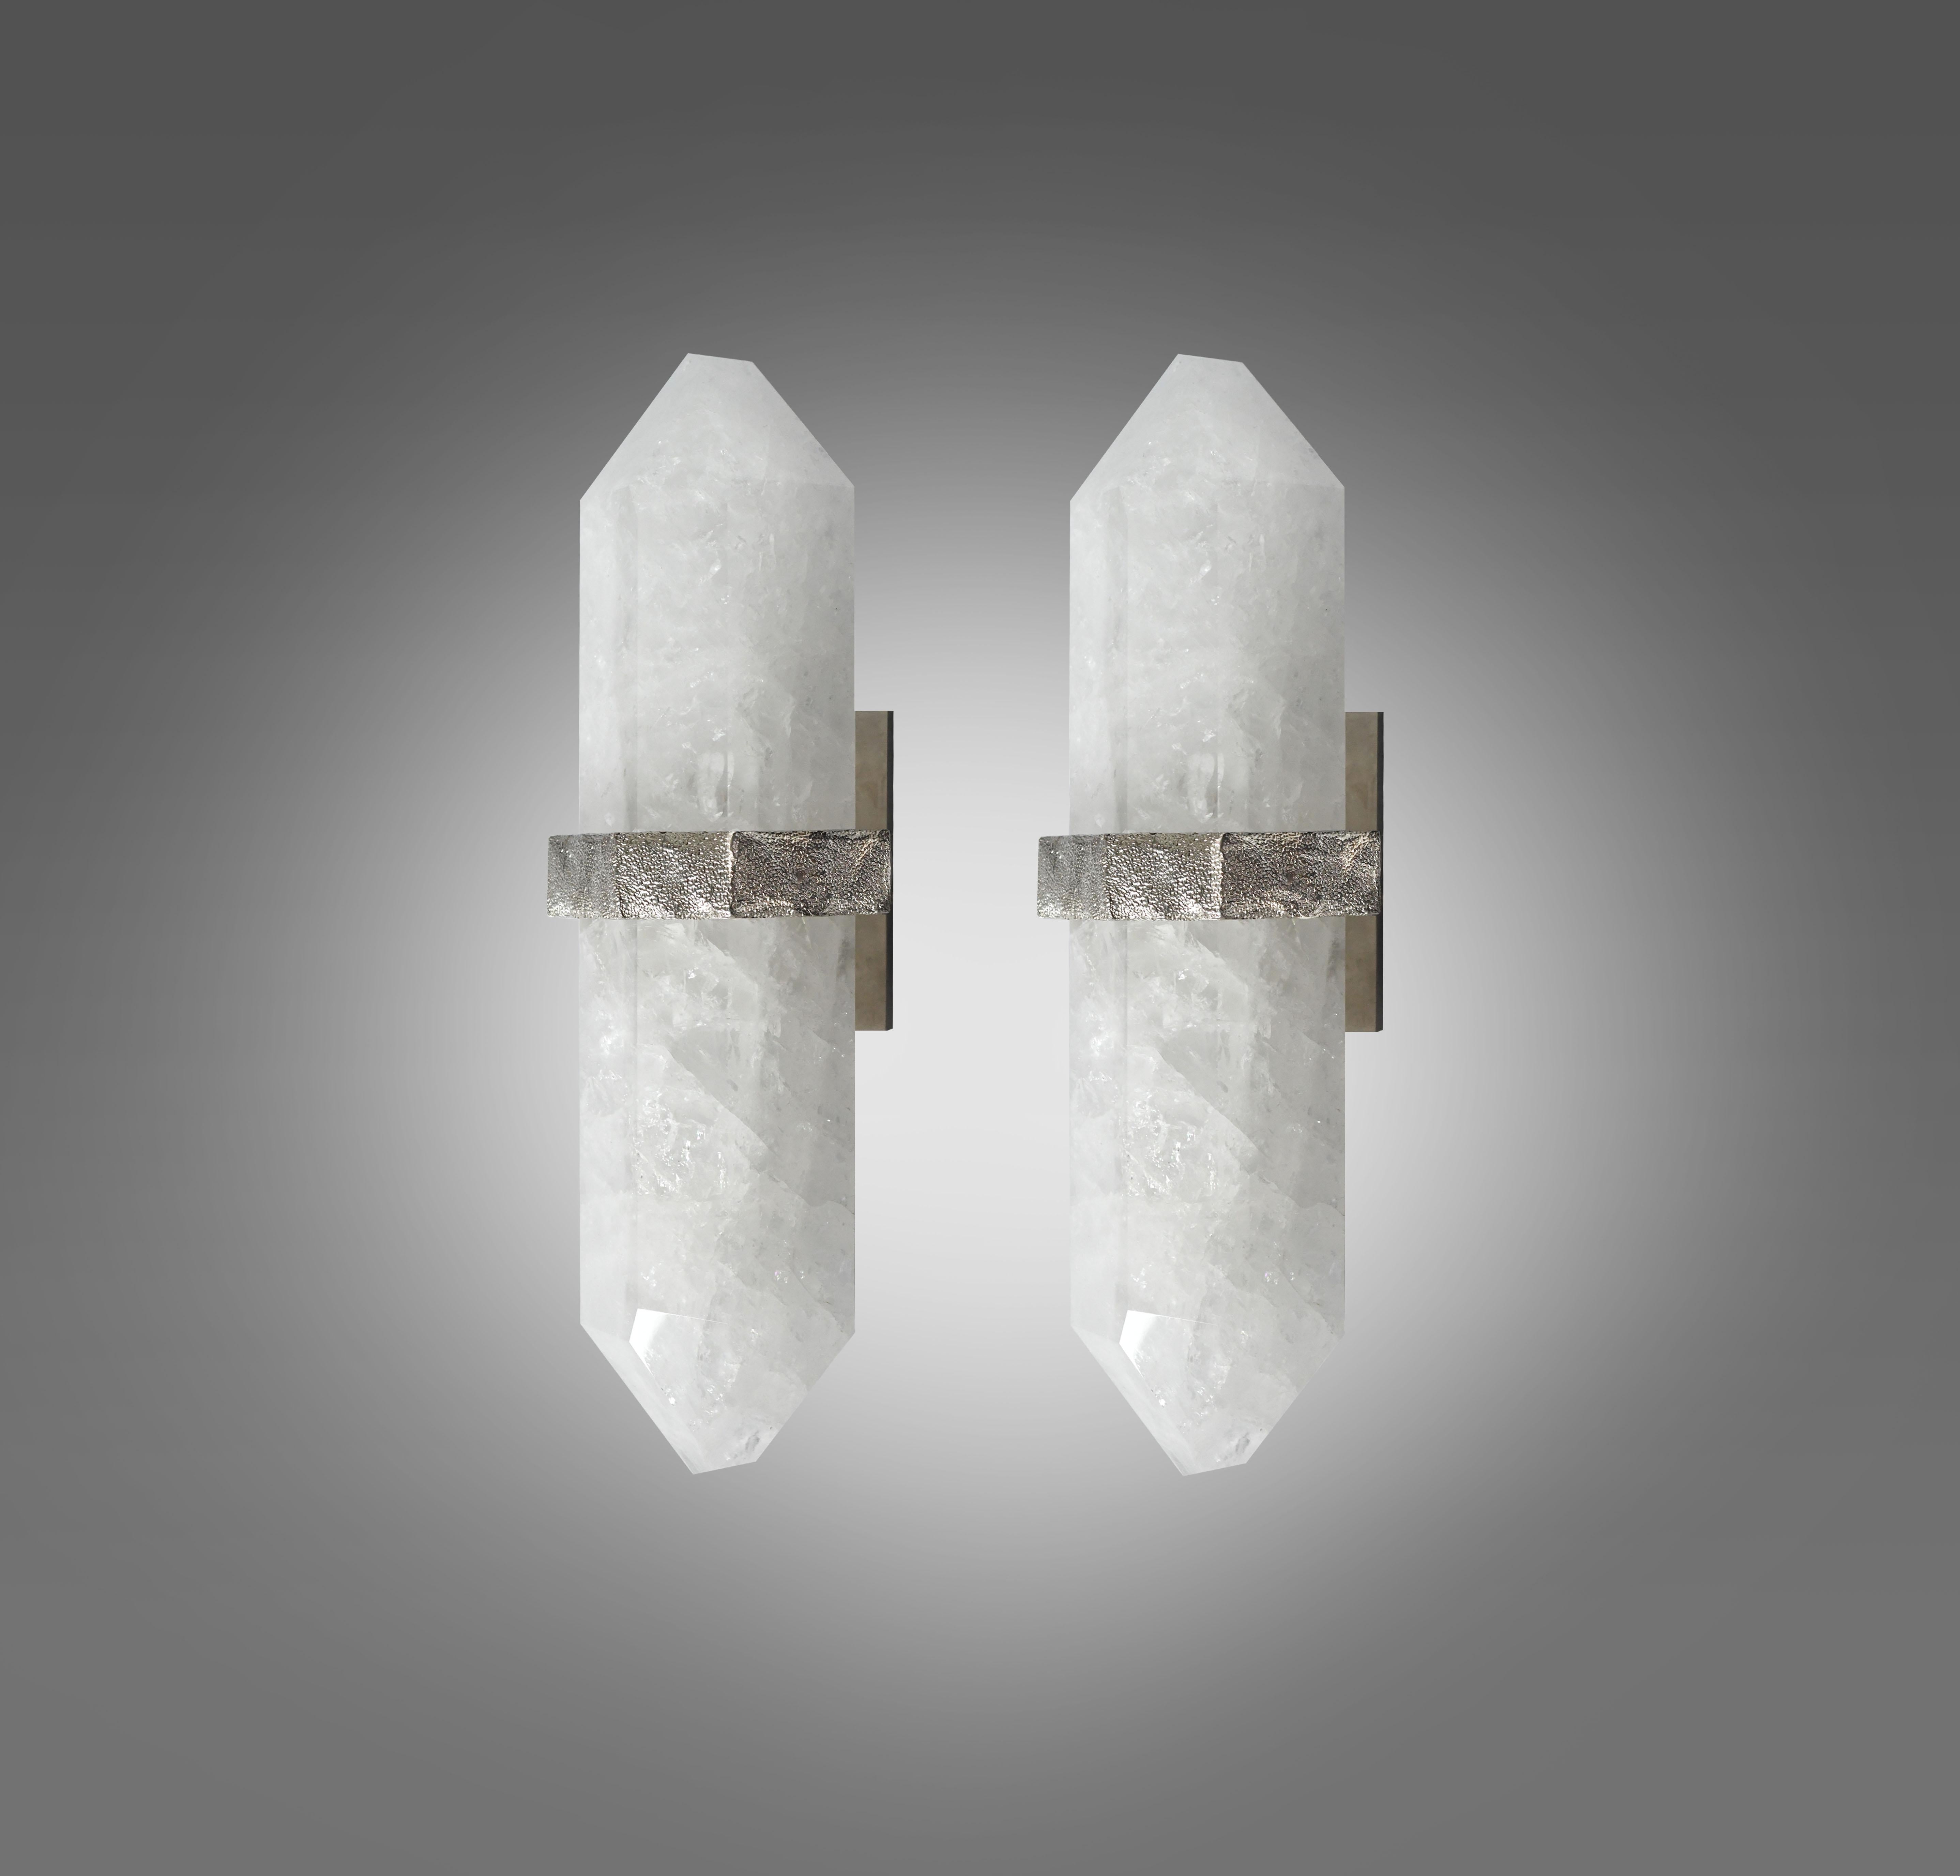 Fine carved diamond form rock crystal quartz wall sconces, mount with rich texture of cast nickel plating decoration, created by Phoenix Gallery NYC. 
Custom size, finish, and quantity upon request. 
Each sconce installed two sockets, and will